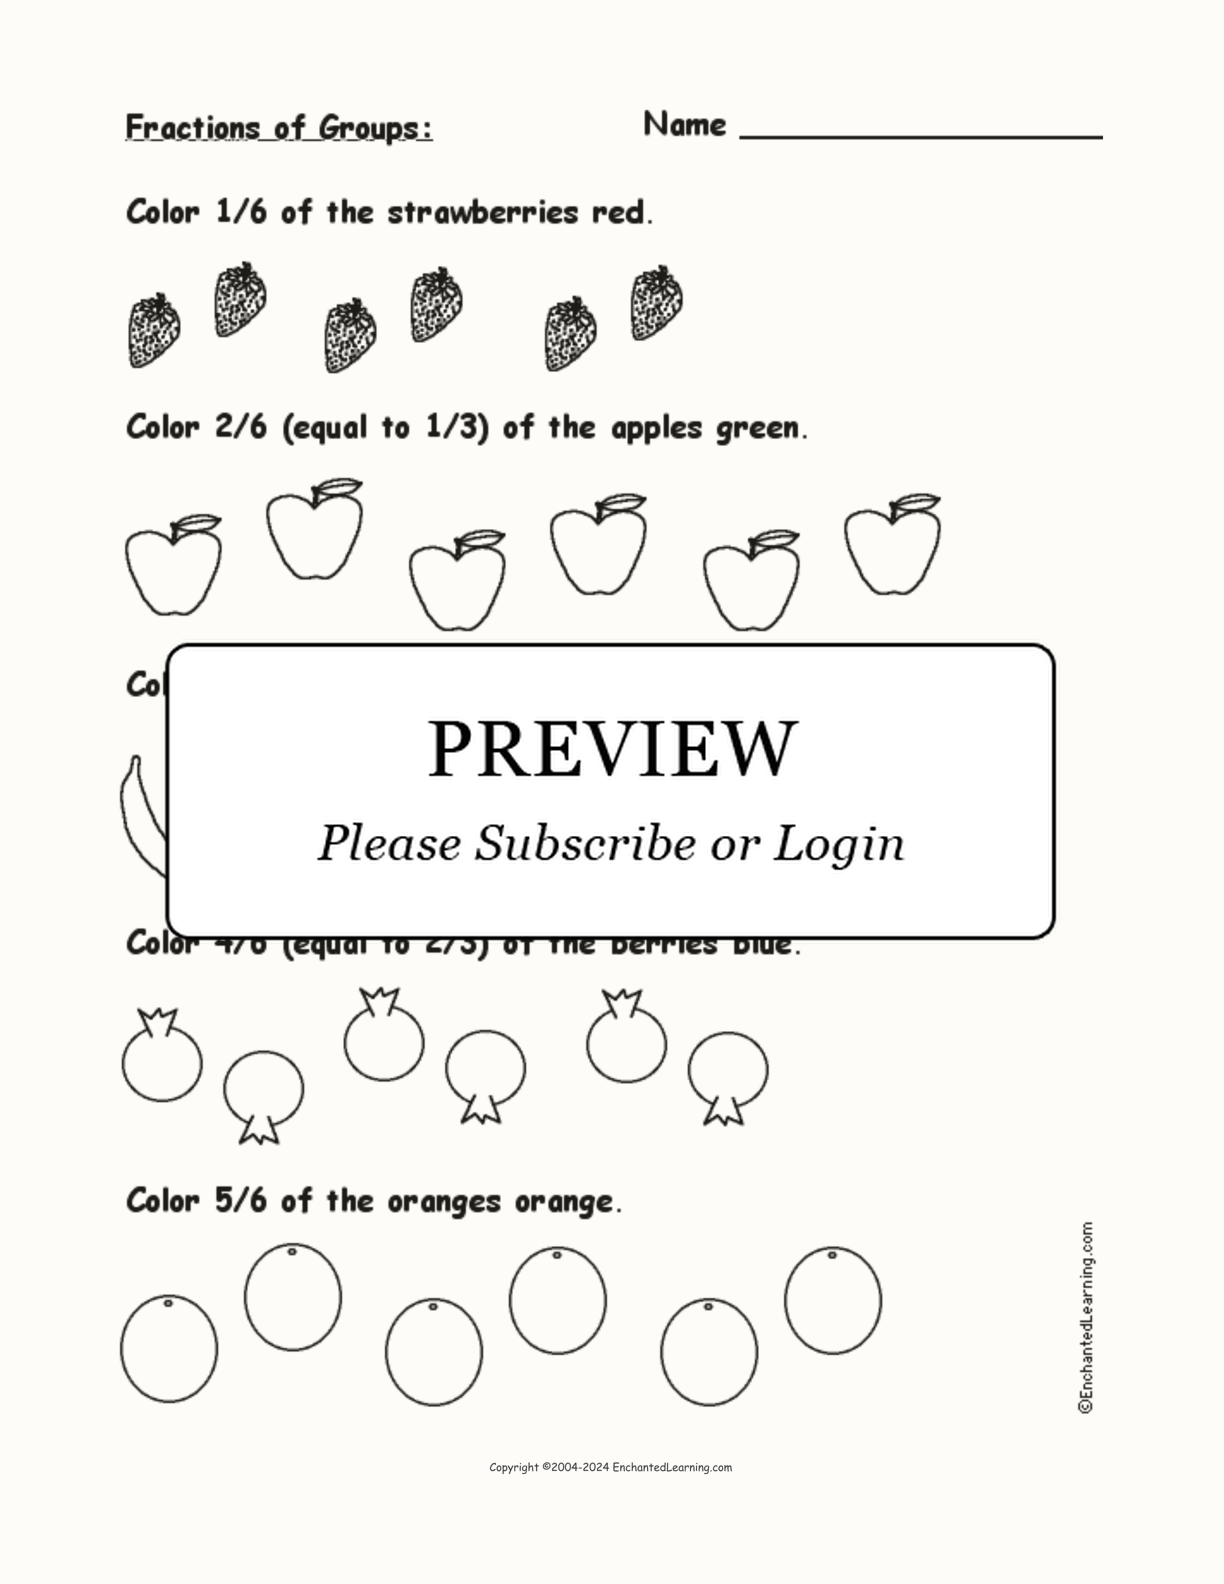 Color Fractions of Groups of Fruit interactive worksheet page 1